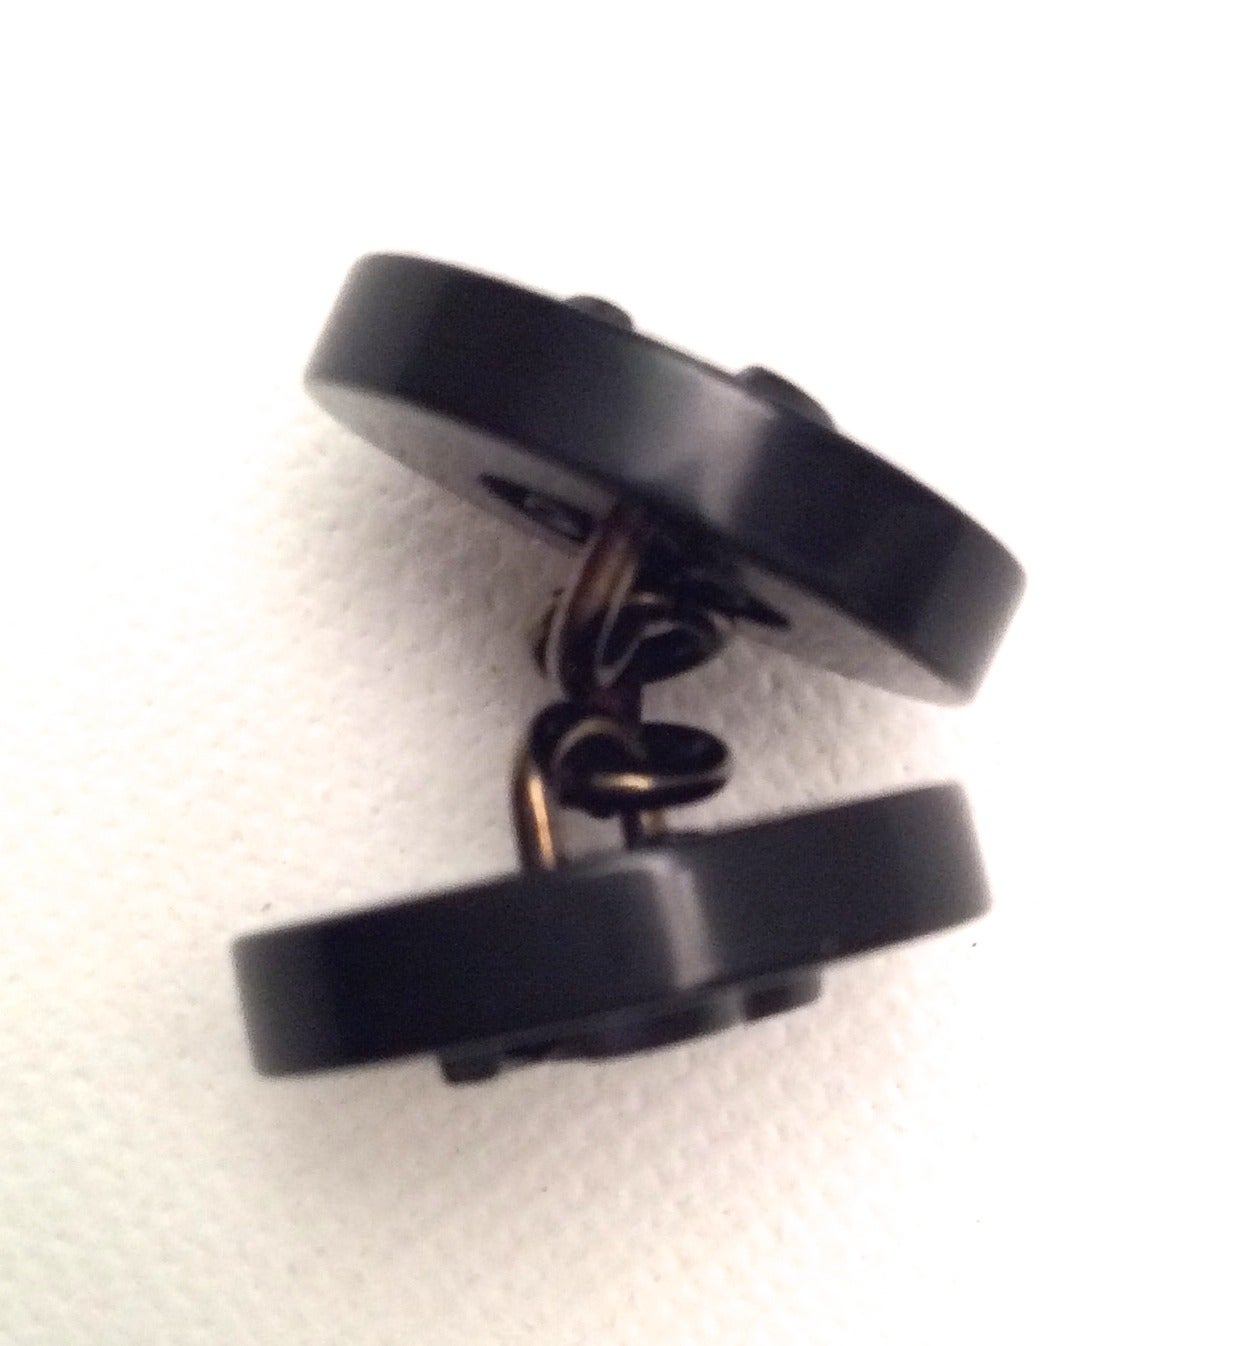 Pair of Chanel Black Cufflinks - 1980's - CC Logo In Excellent Condition For Sale In Boca Raton, FL